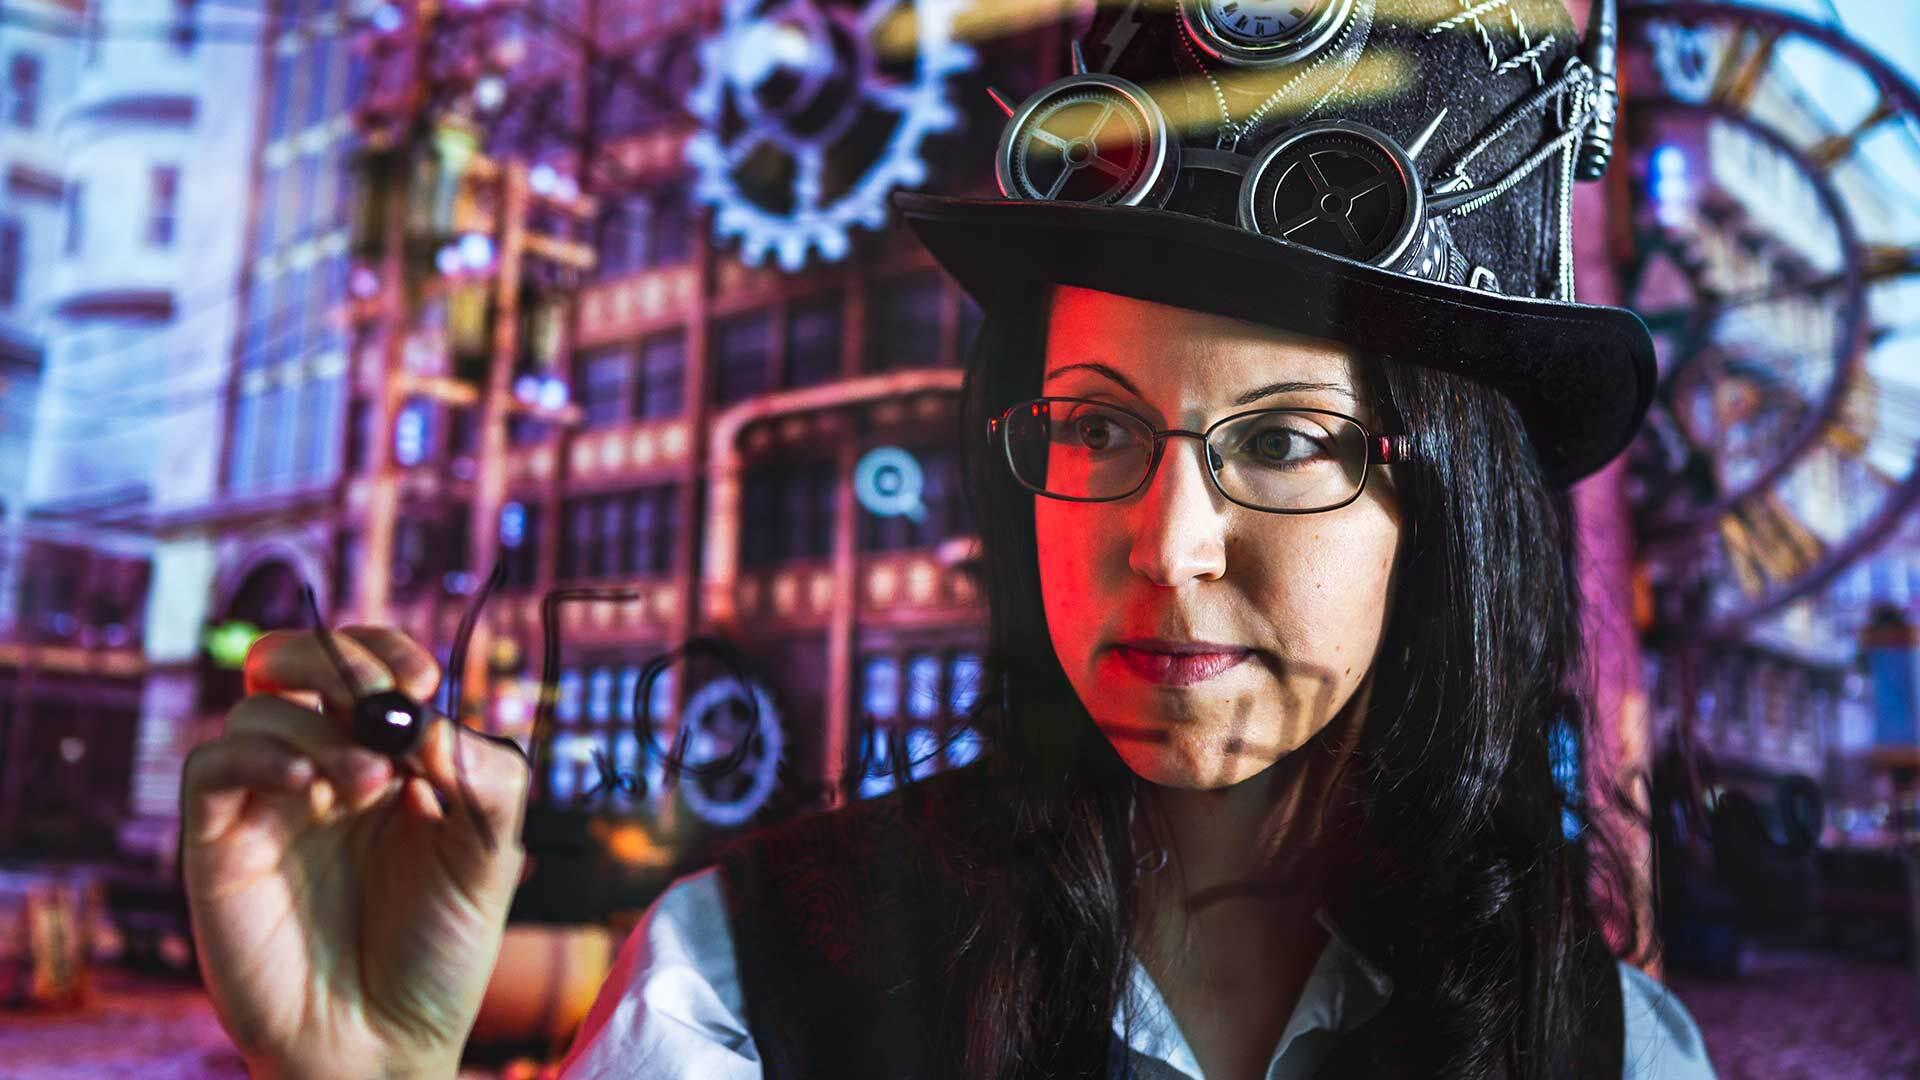 Theoretical physicist Nicole Yunger Halpern wearing a steampunk costume for a photo shoot in preparation for the release of her new book "quantum steampunk."